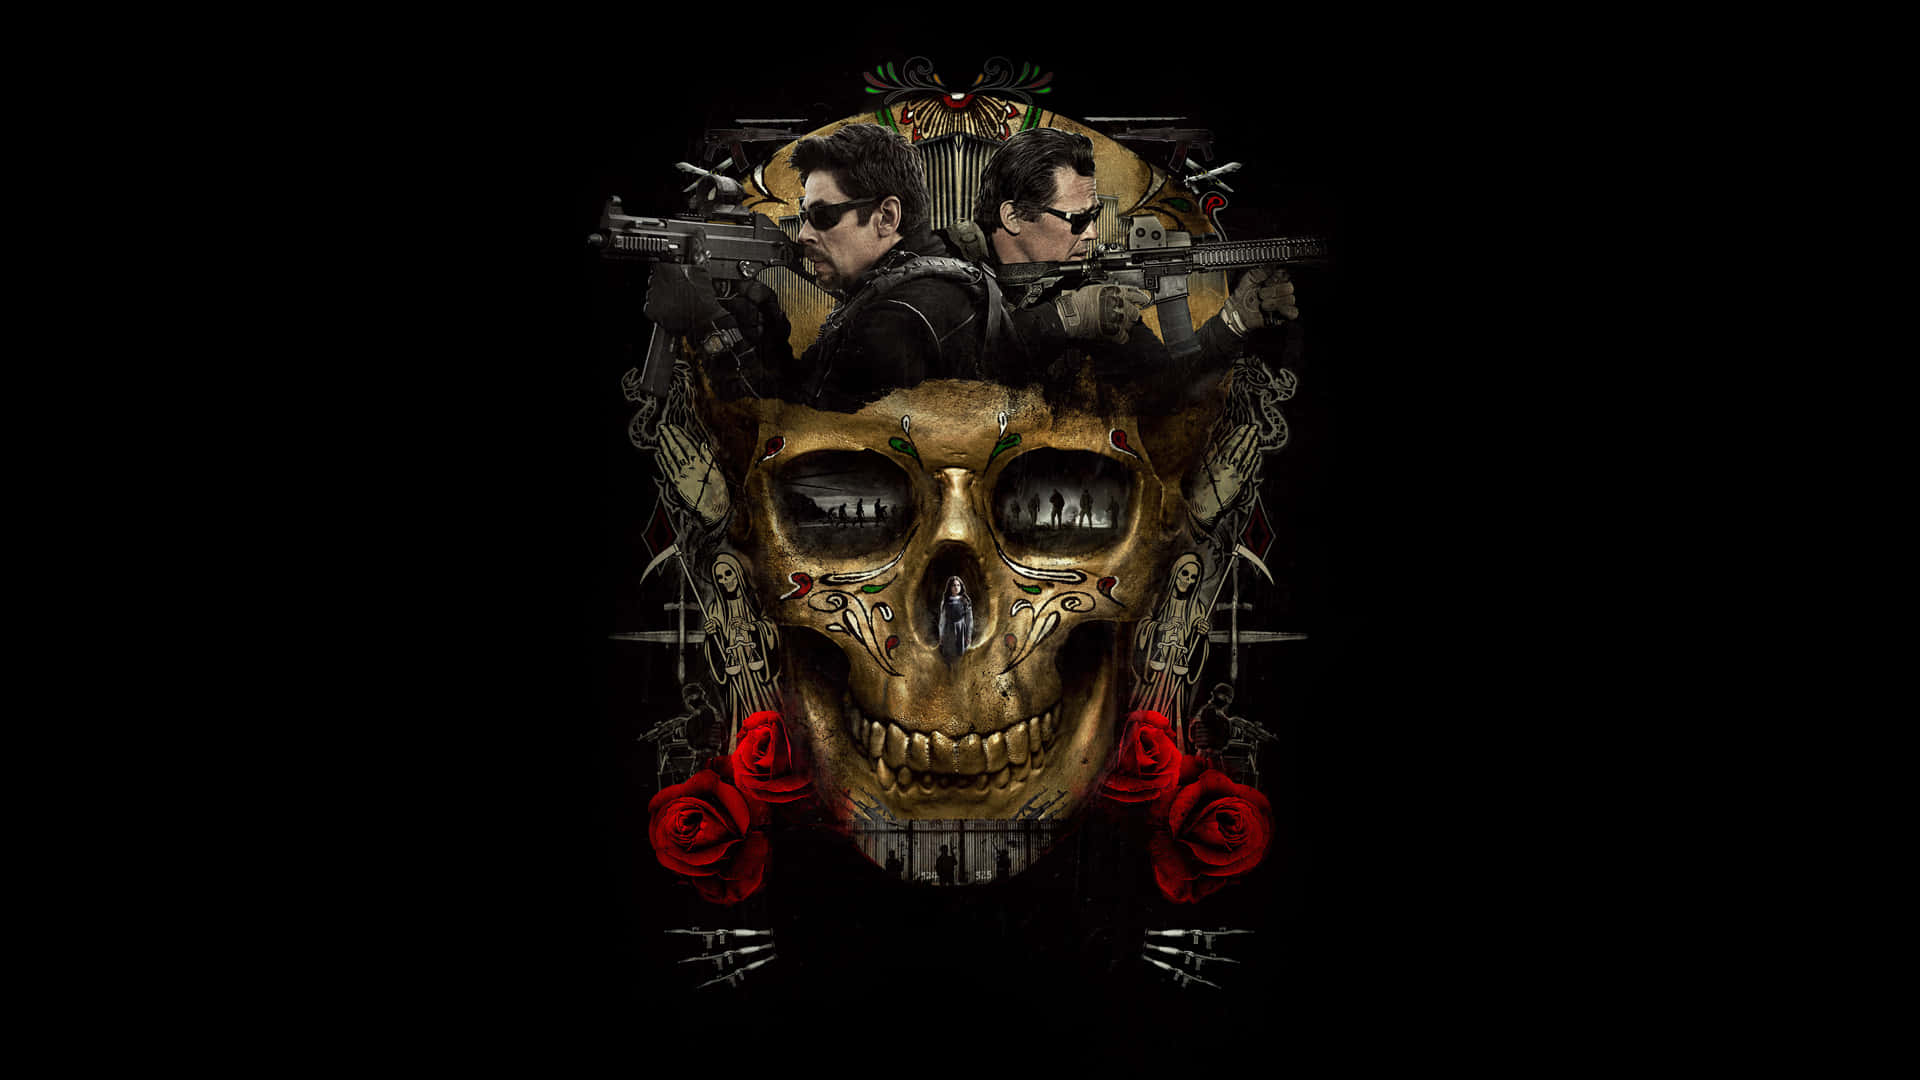 A Skull With Roses And Guns On It